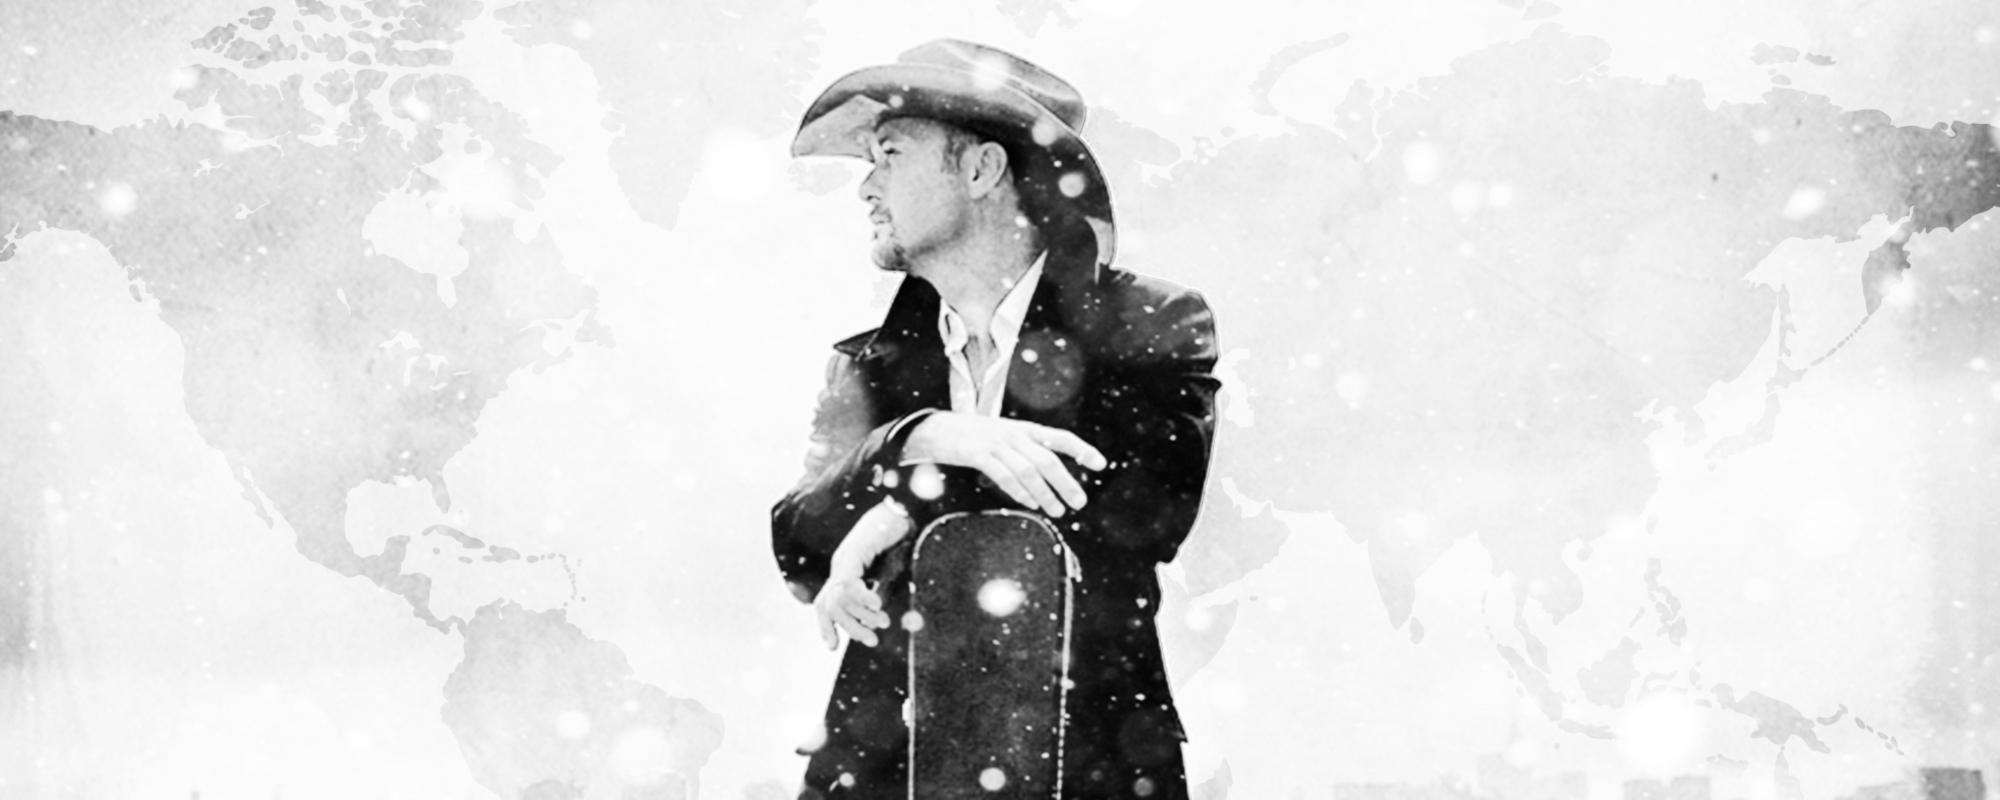 Tim McGraw Shares New Holiday Release, “Christmas All Over The World”